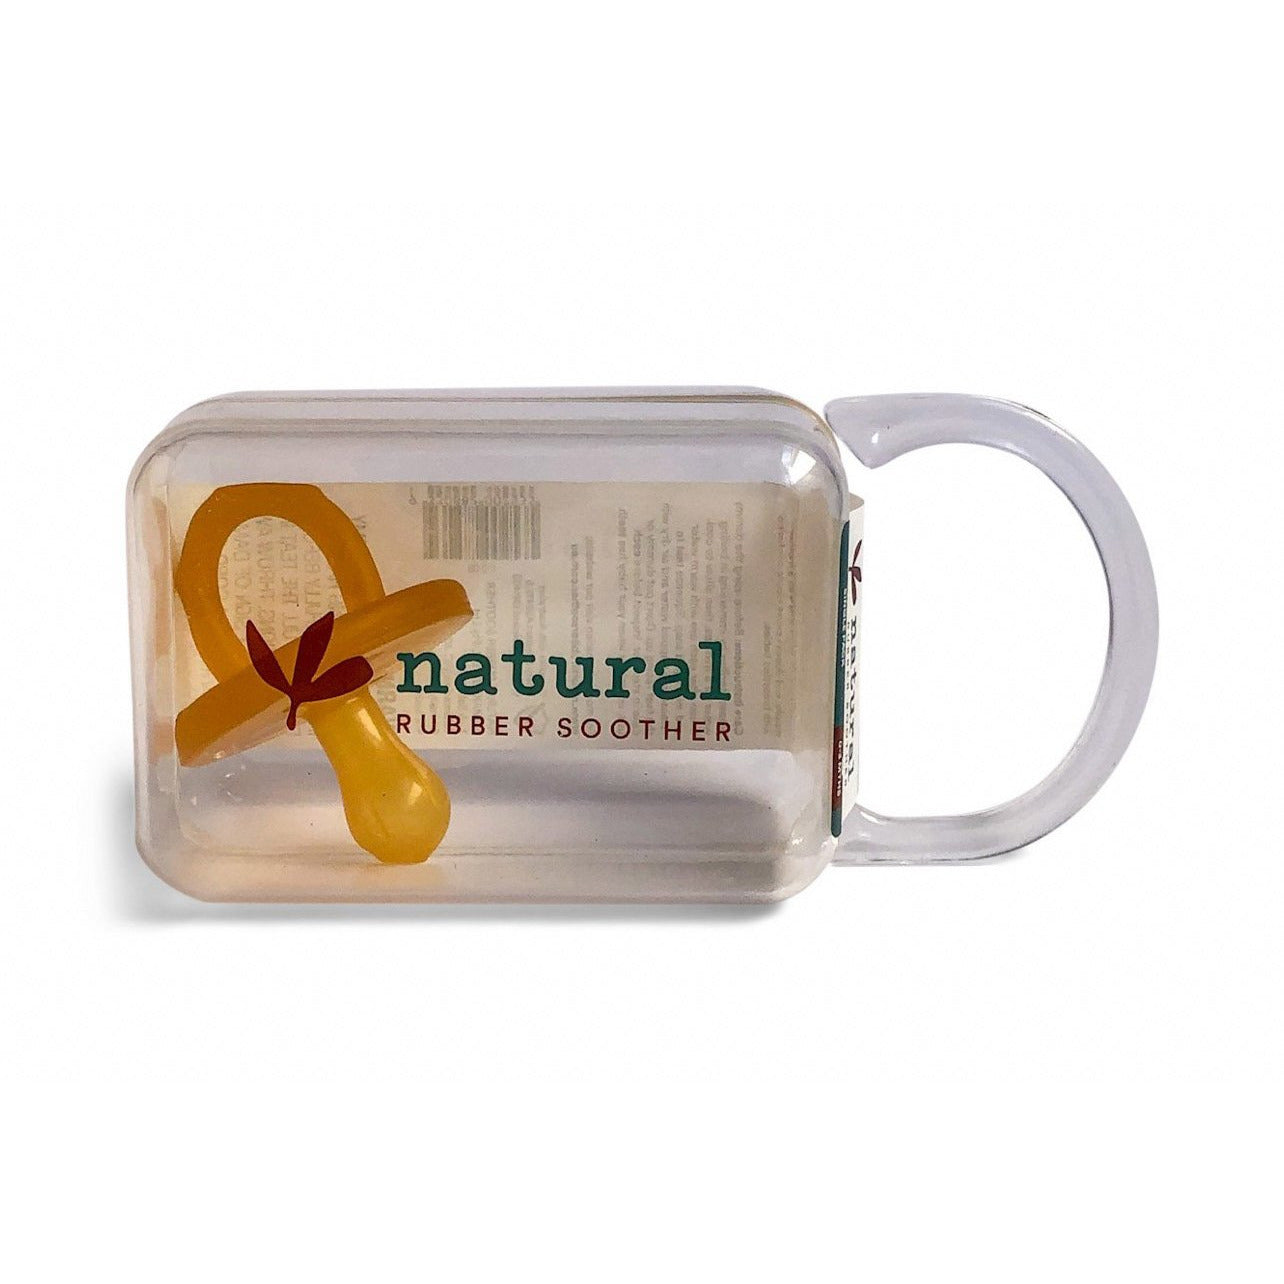 sprouting-littles-natural-rubber-soother-single